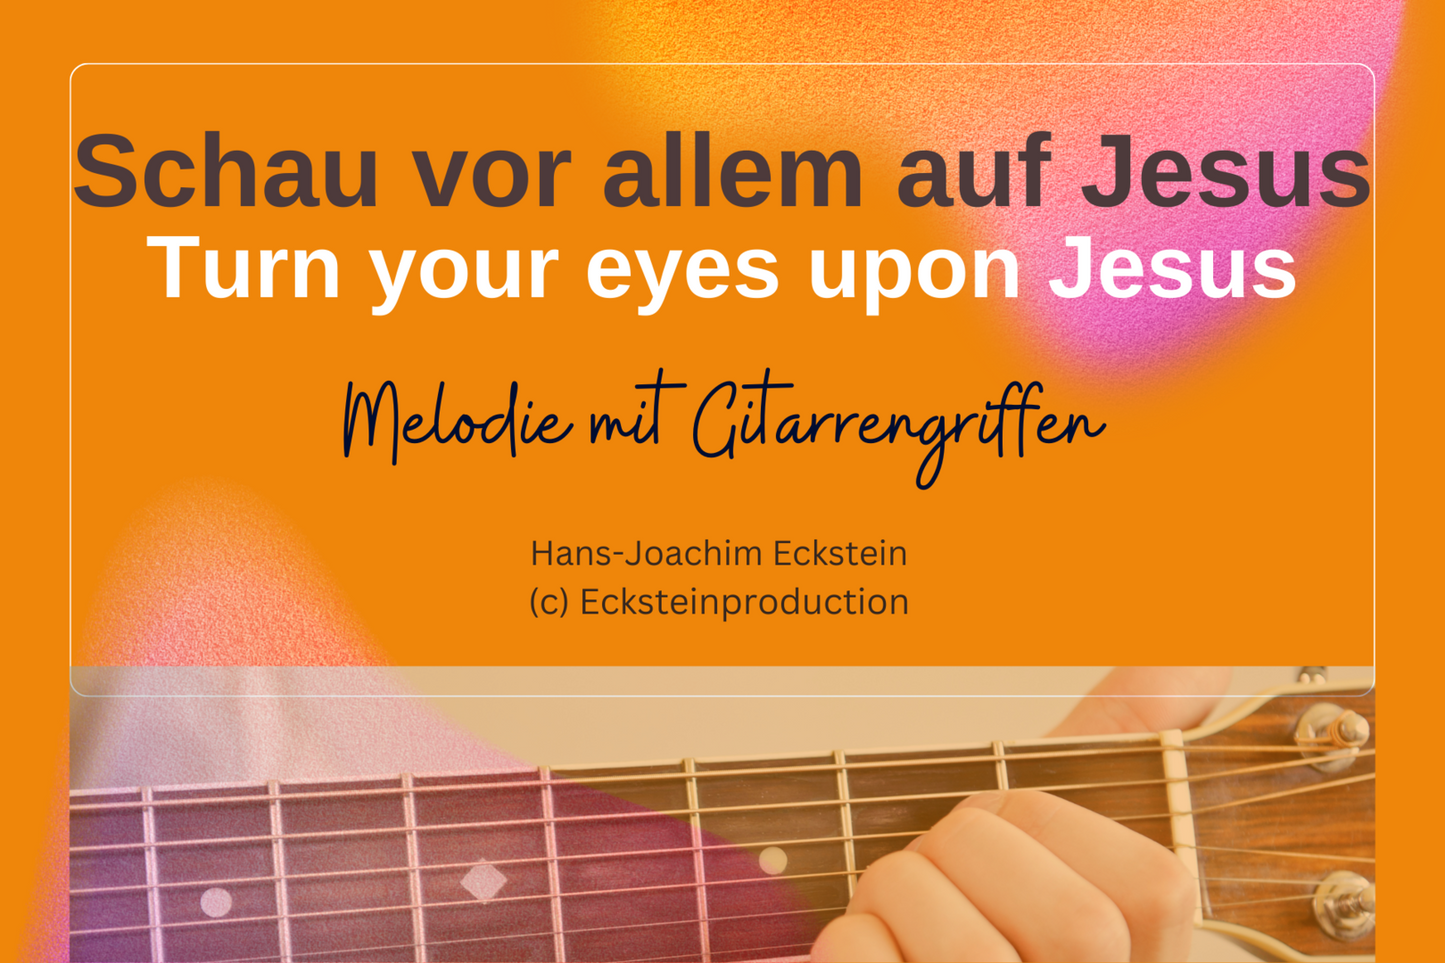 Above all, look at Jesus (Turn your eyes upon Jesus) melody with guitar fingerings Hans-Joachim Eckst